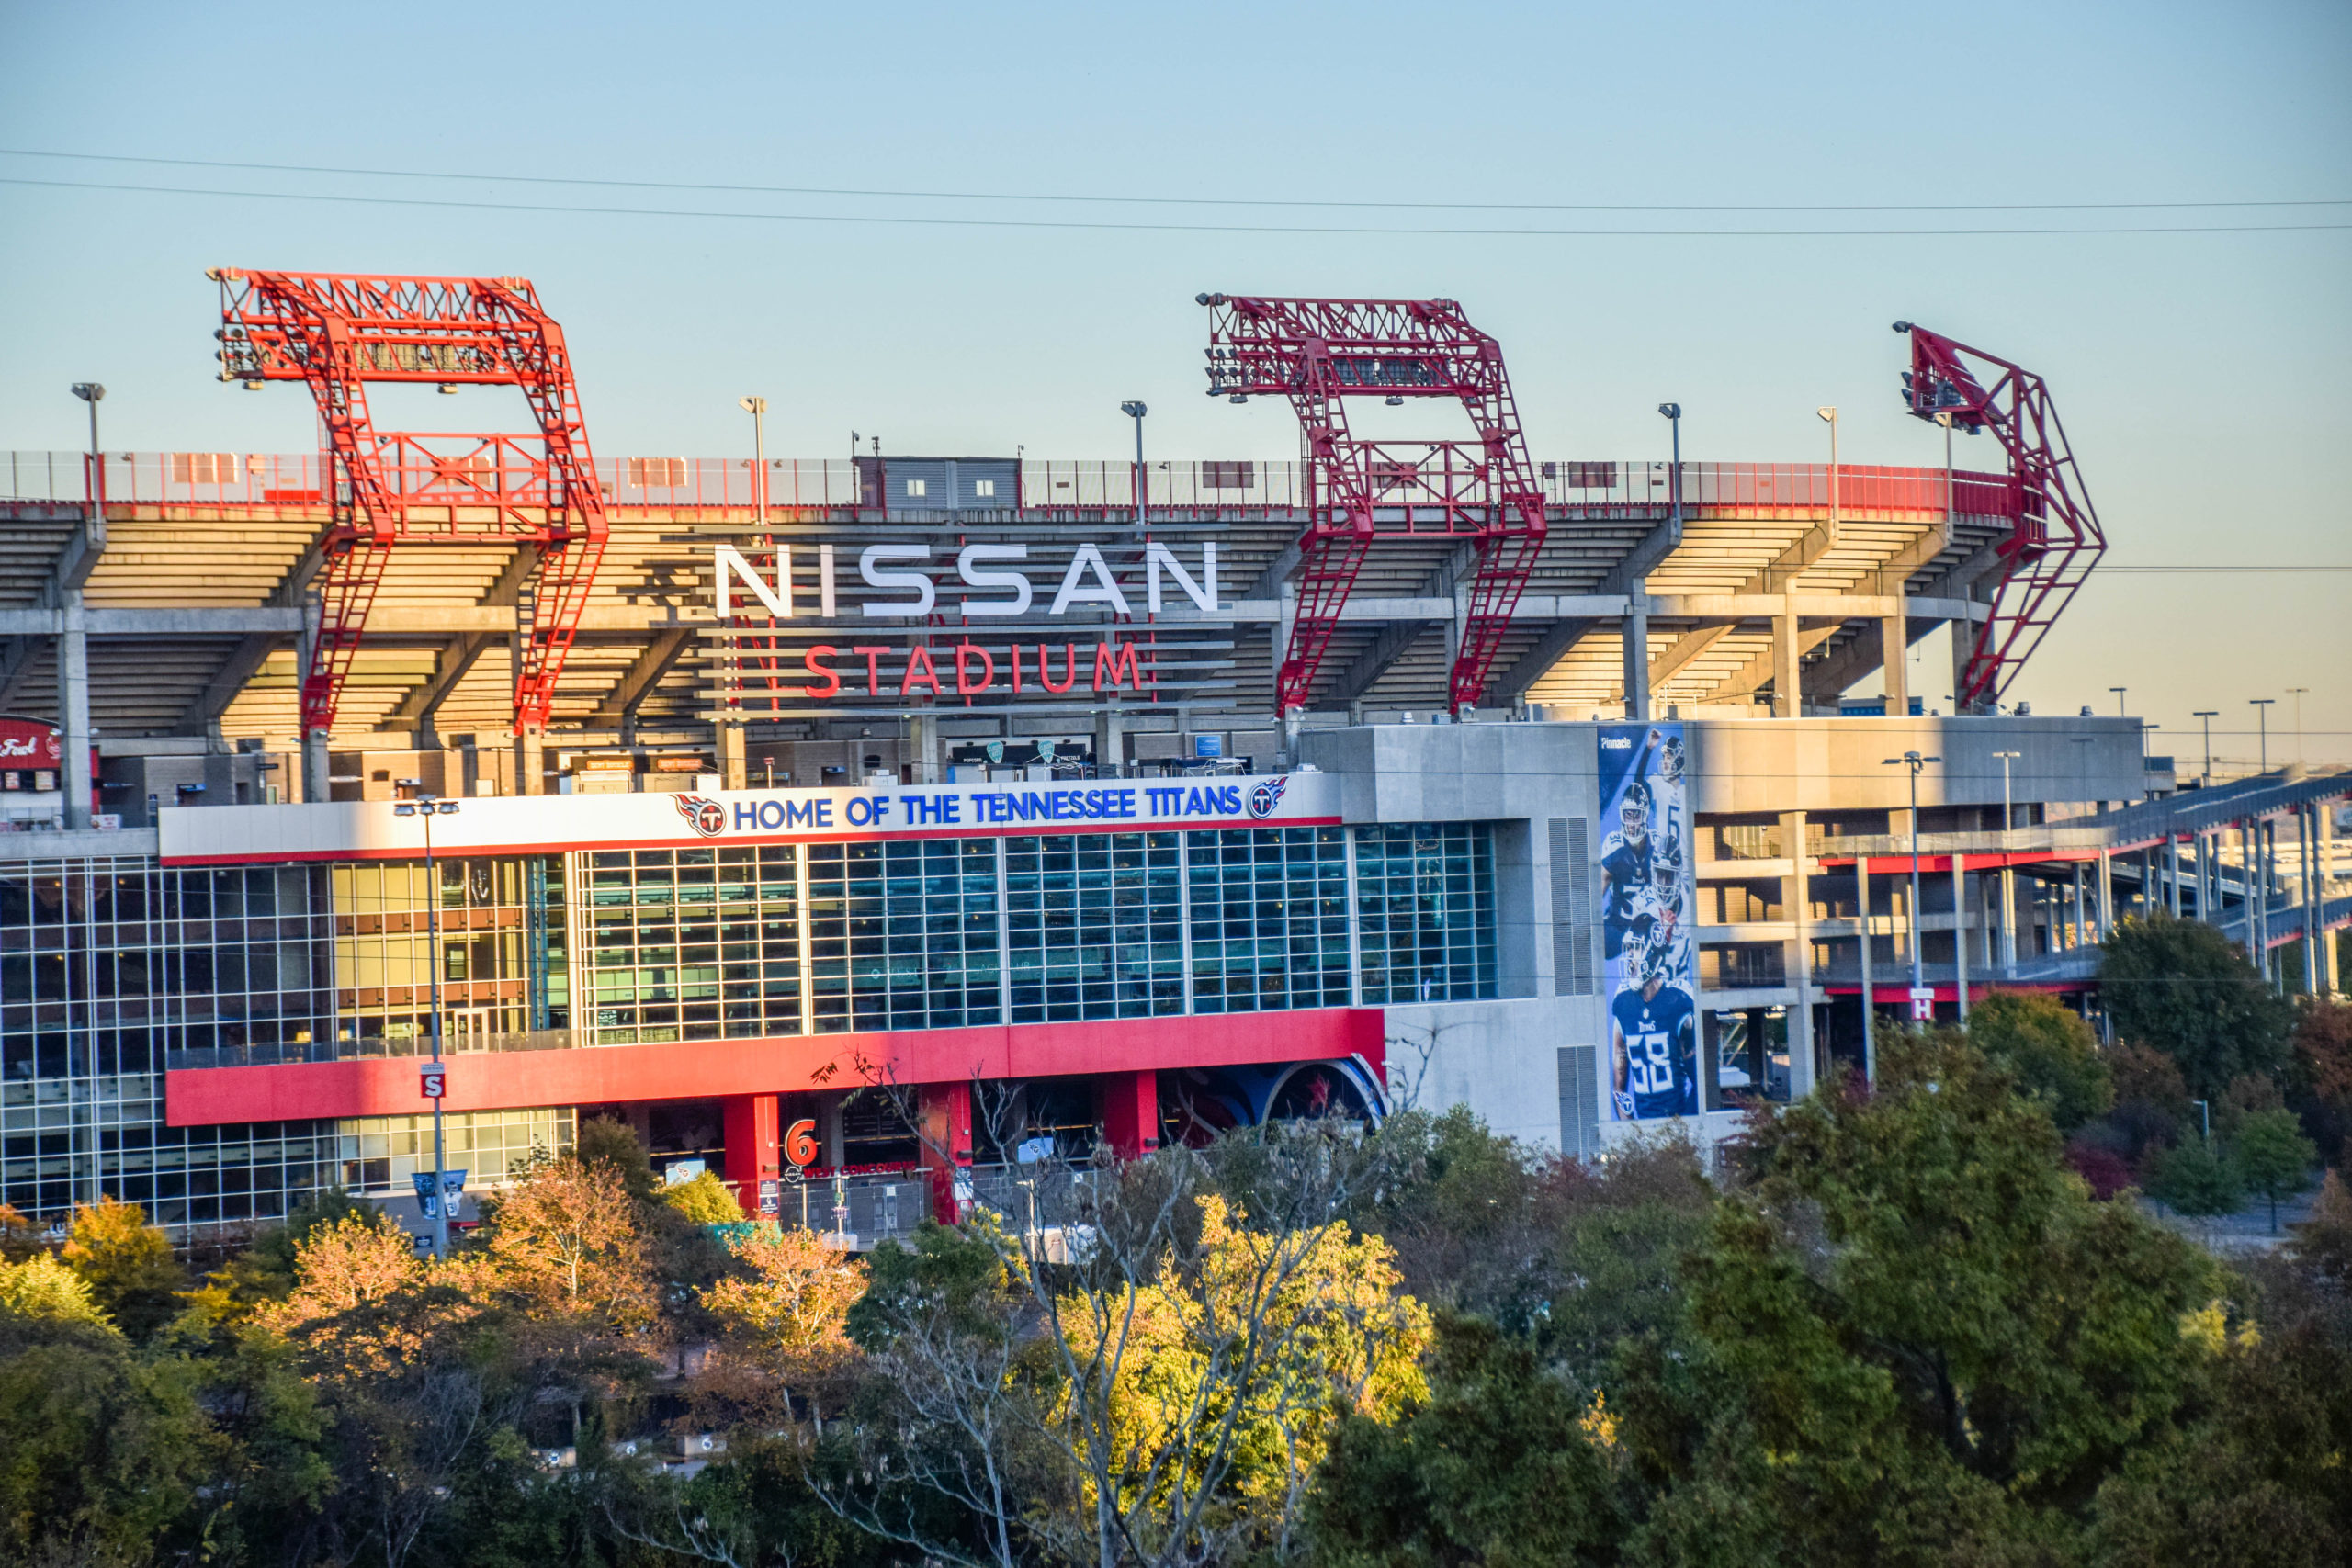 Tourists could foot the bill for new Titans dome under Nashville proposal